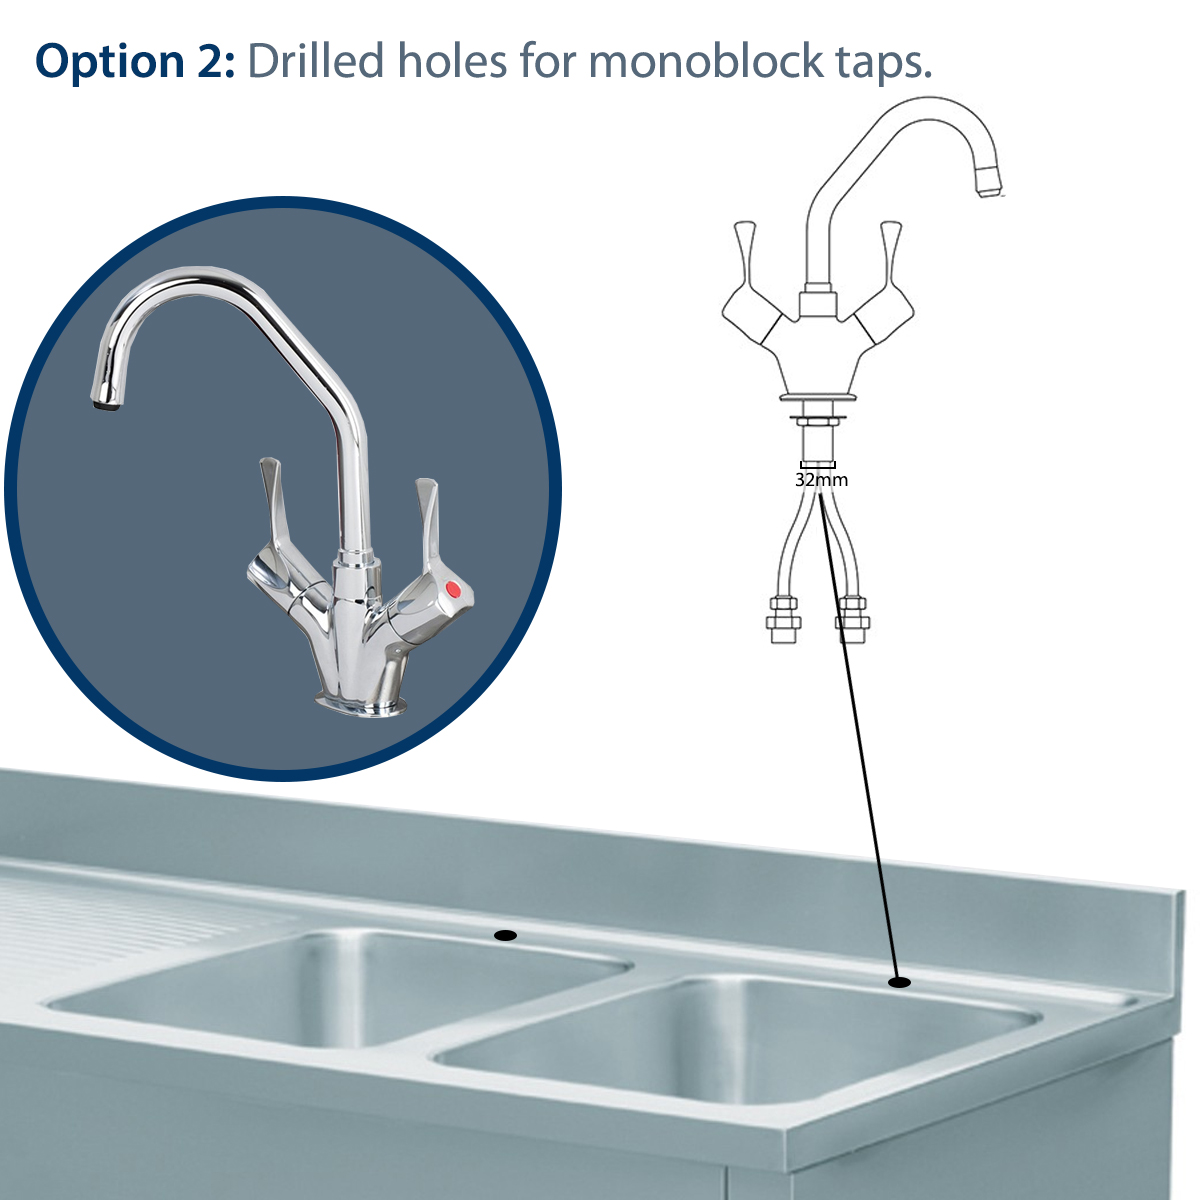 Pre-Drilled Holes For Monoblock Taps (32mm diameter hole) - Option 2